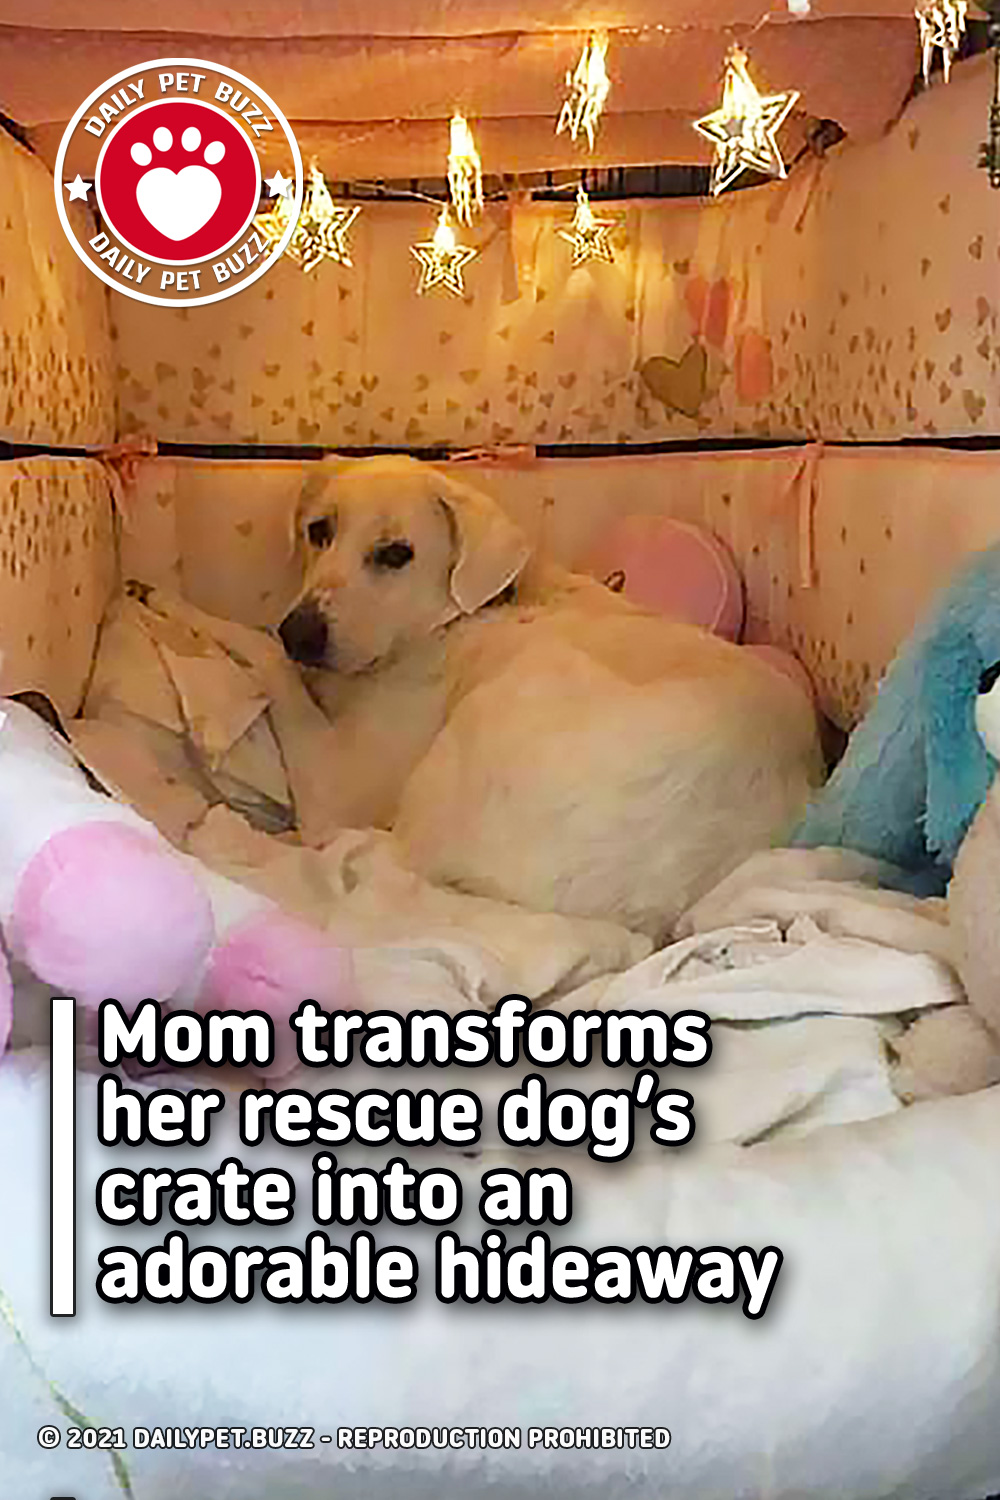 Mom transforms her rescue dog’s crate into an adorable hideaway